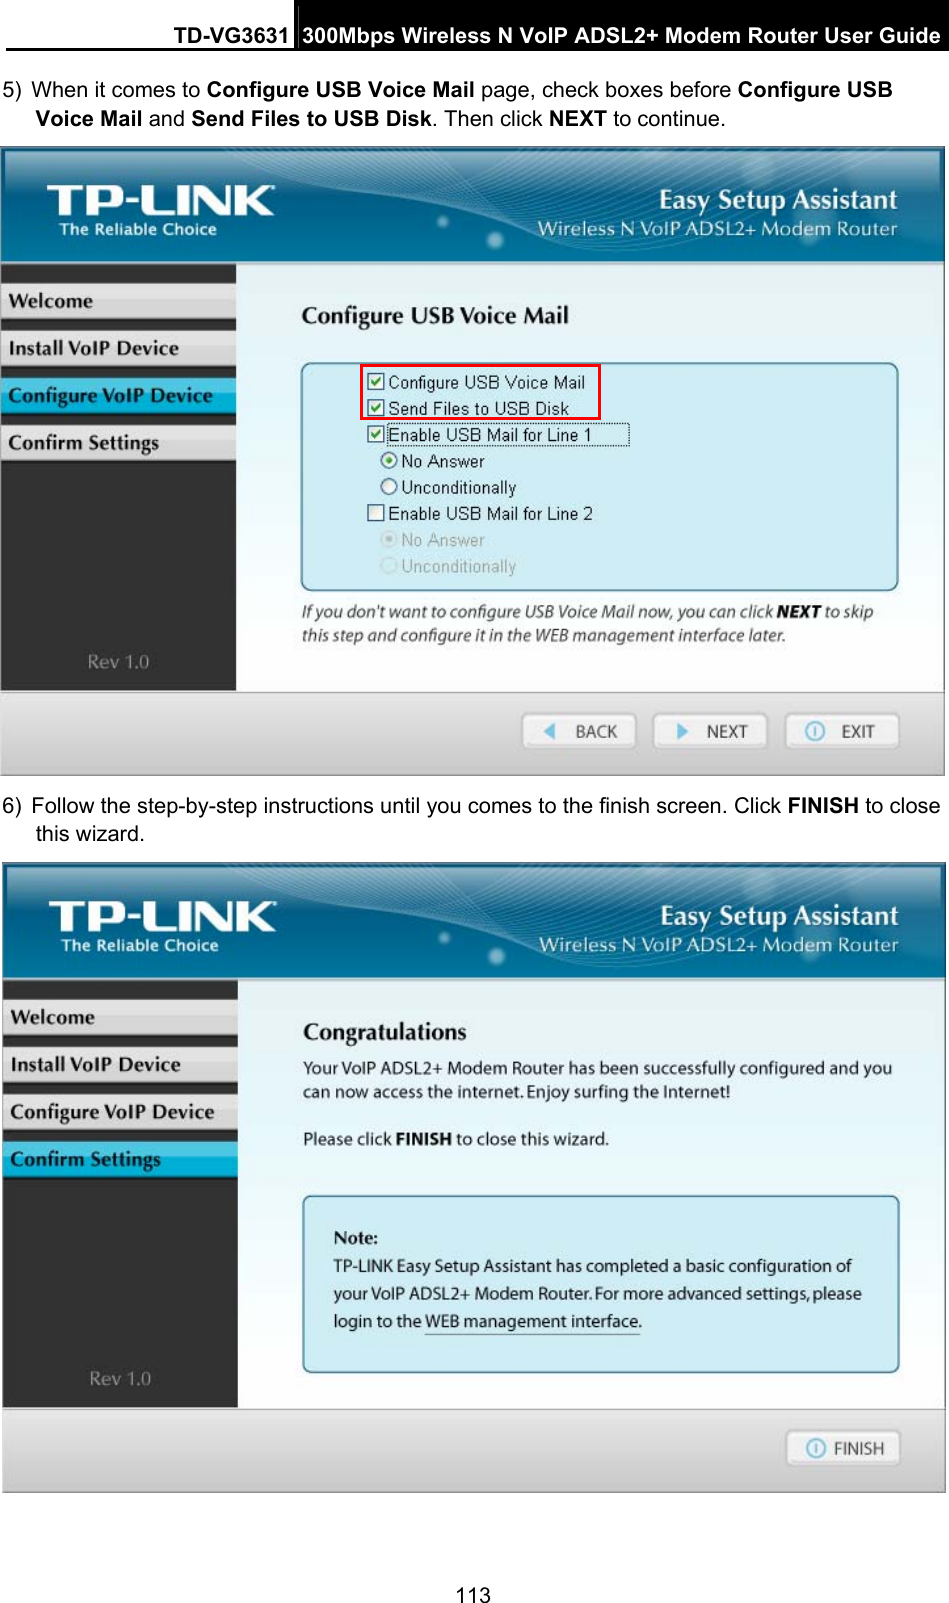 TD-VG3631 300Mbps Wireless N VoIP ADSL2+ Modem Router User Guide 113 5)  When it comes to Configure USB Voice Mail page, check boxes before Configure USB Voice Mail and Send Files to USB Disk. Then click NEXT to continue.    6)  Follow the step-by-step instructions until you comes to the finish screen. Click FINISH to close this wizard.  